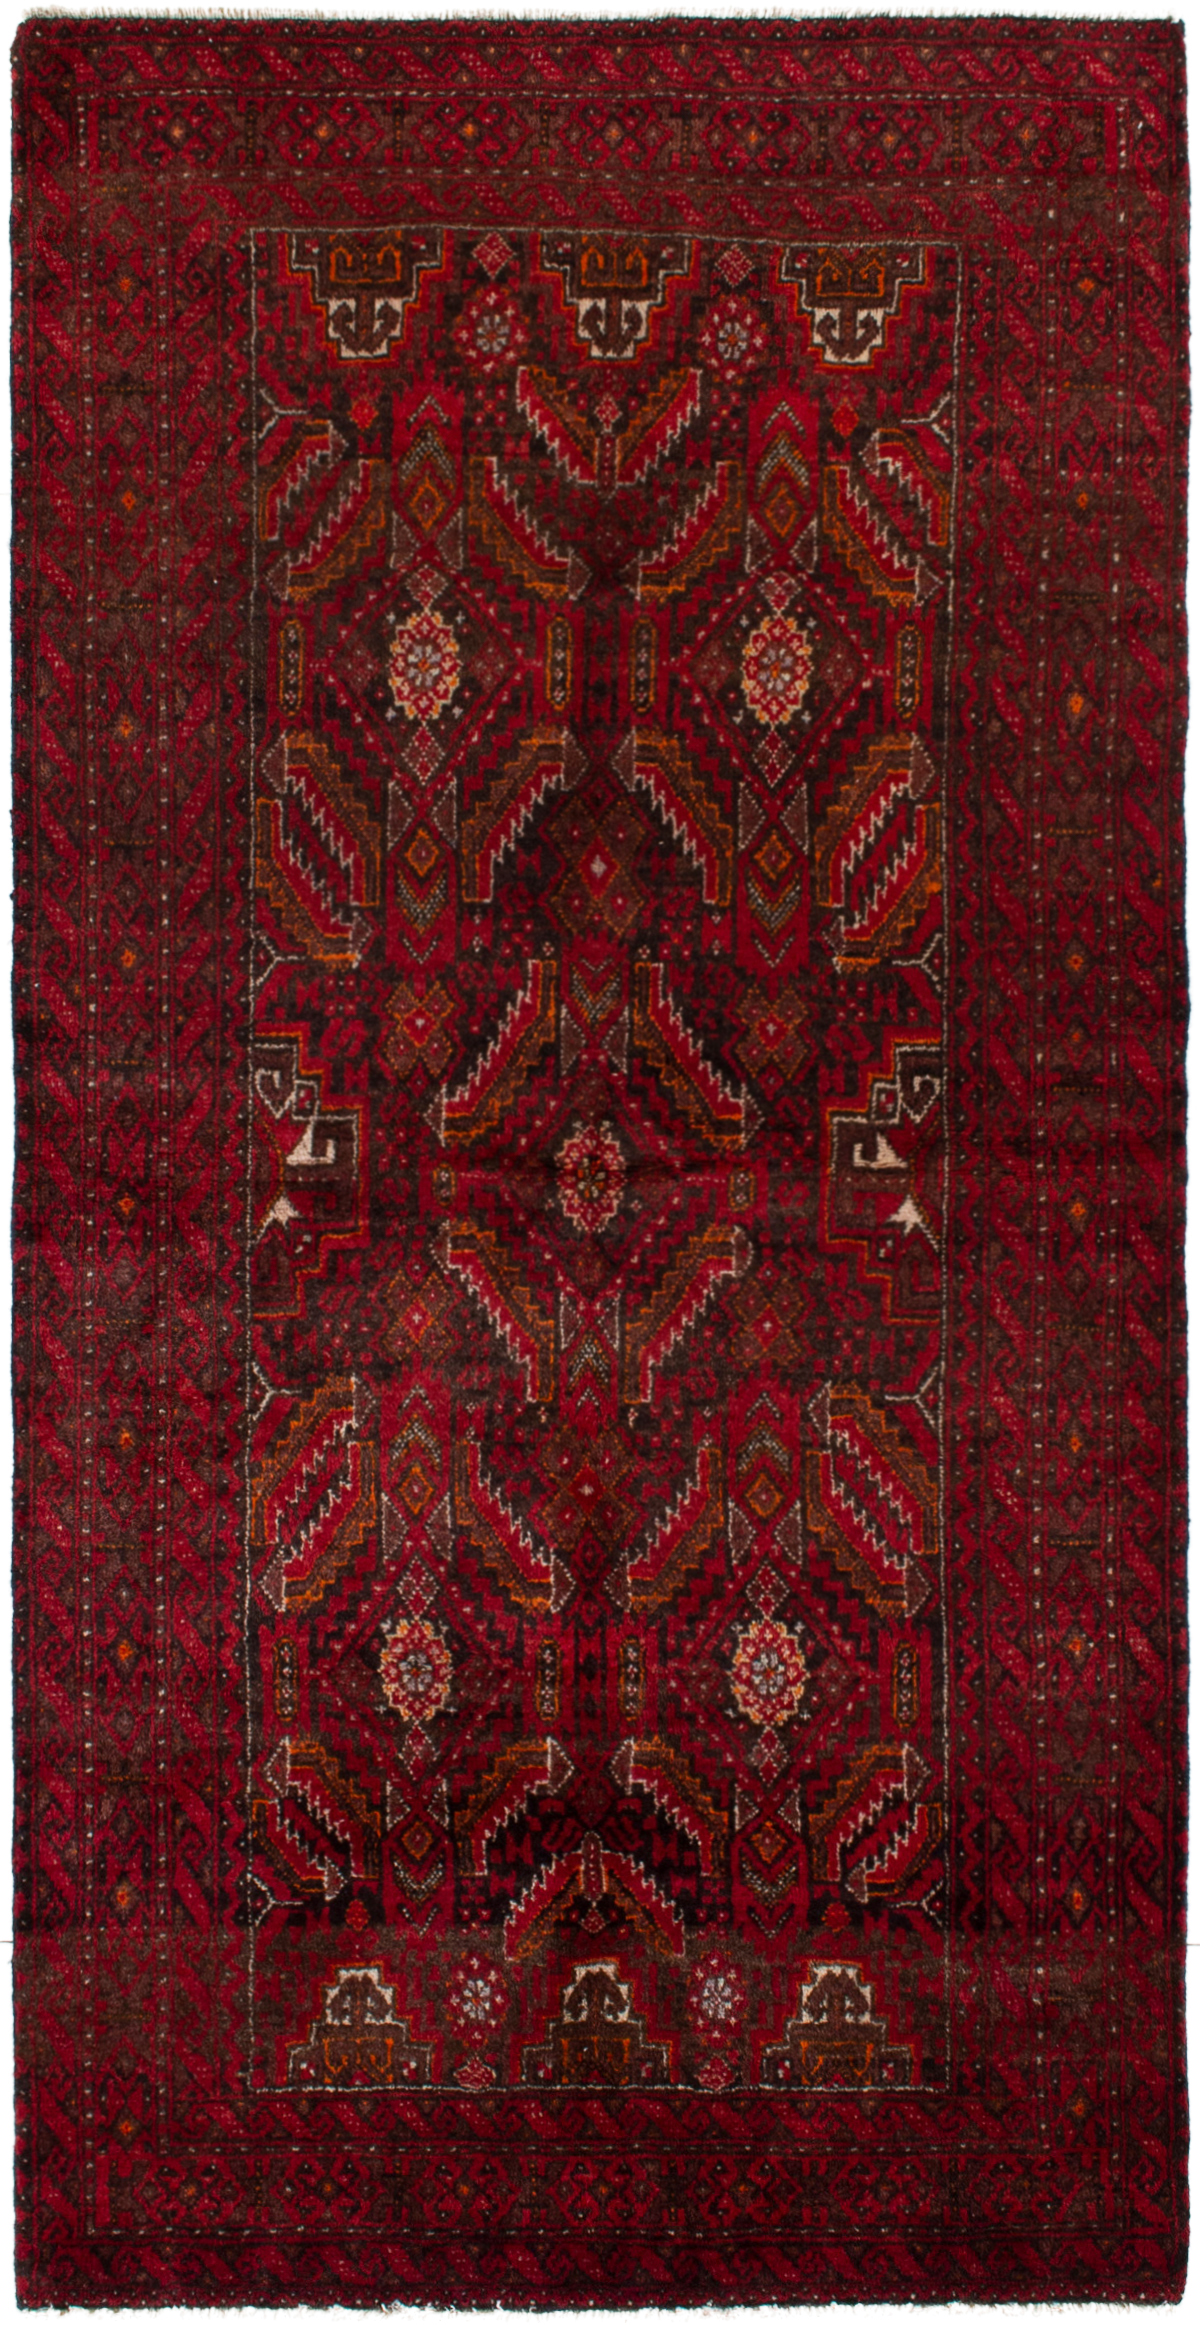 Hand-knotted Finest Baluch  Wool Rug 3'3" x 6'4"  Size: 3'3" x 6'4"  